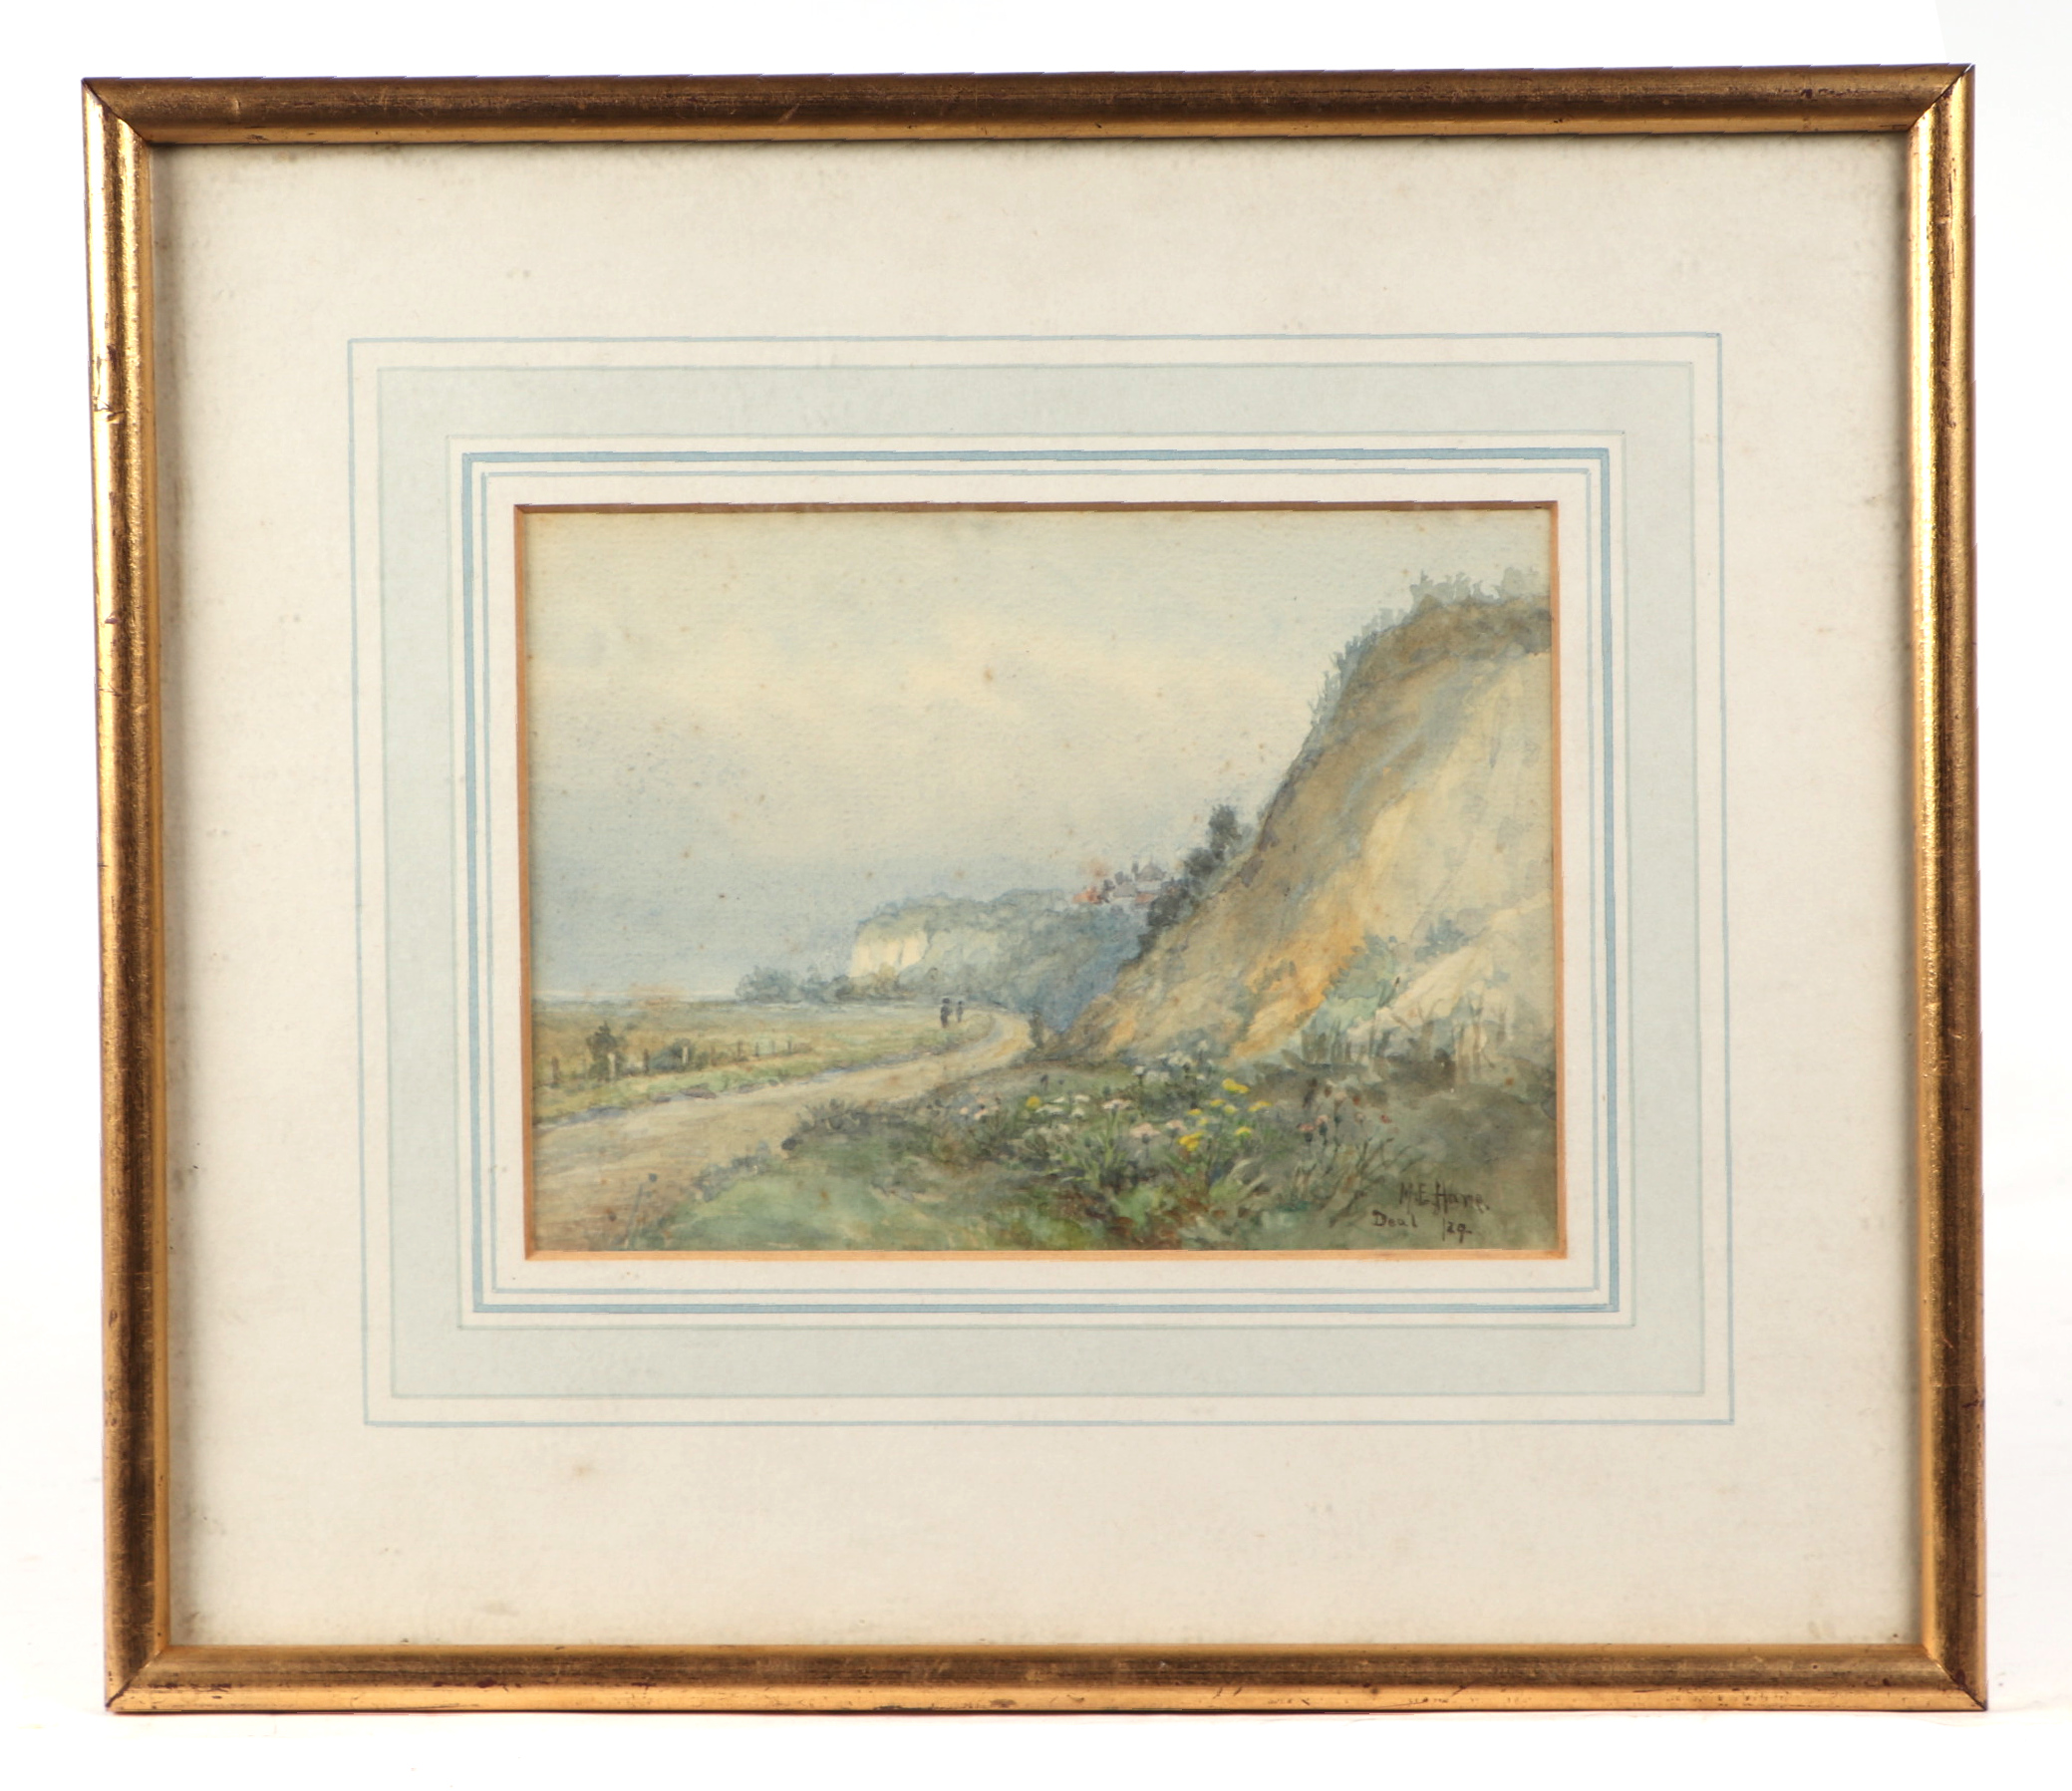 M E Hare (Early 20th century British) - Deal, Kent, Cliffside Walk- signed and dated lower right